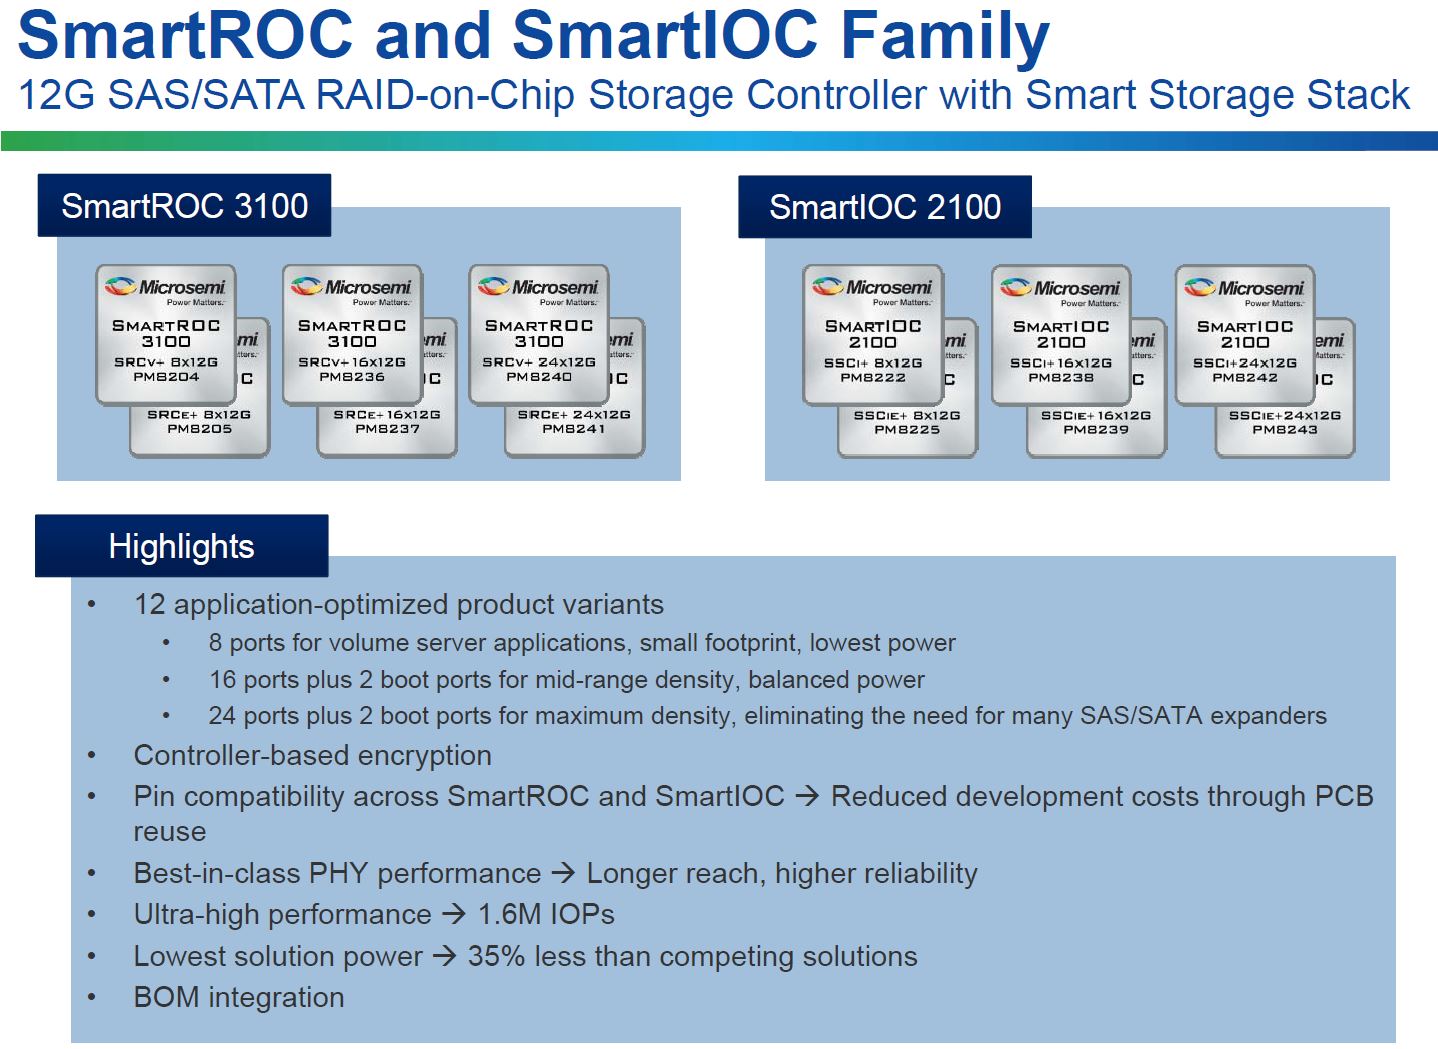 SmartROC RAID-on-Chip Controllers